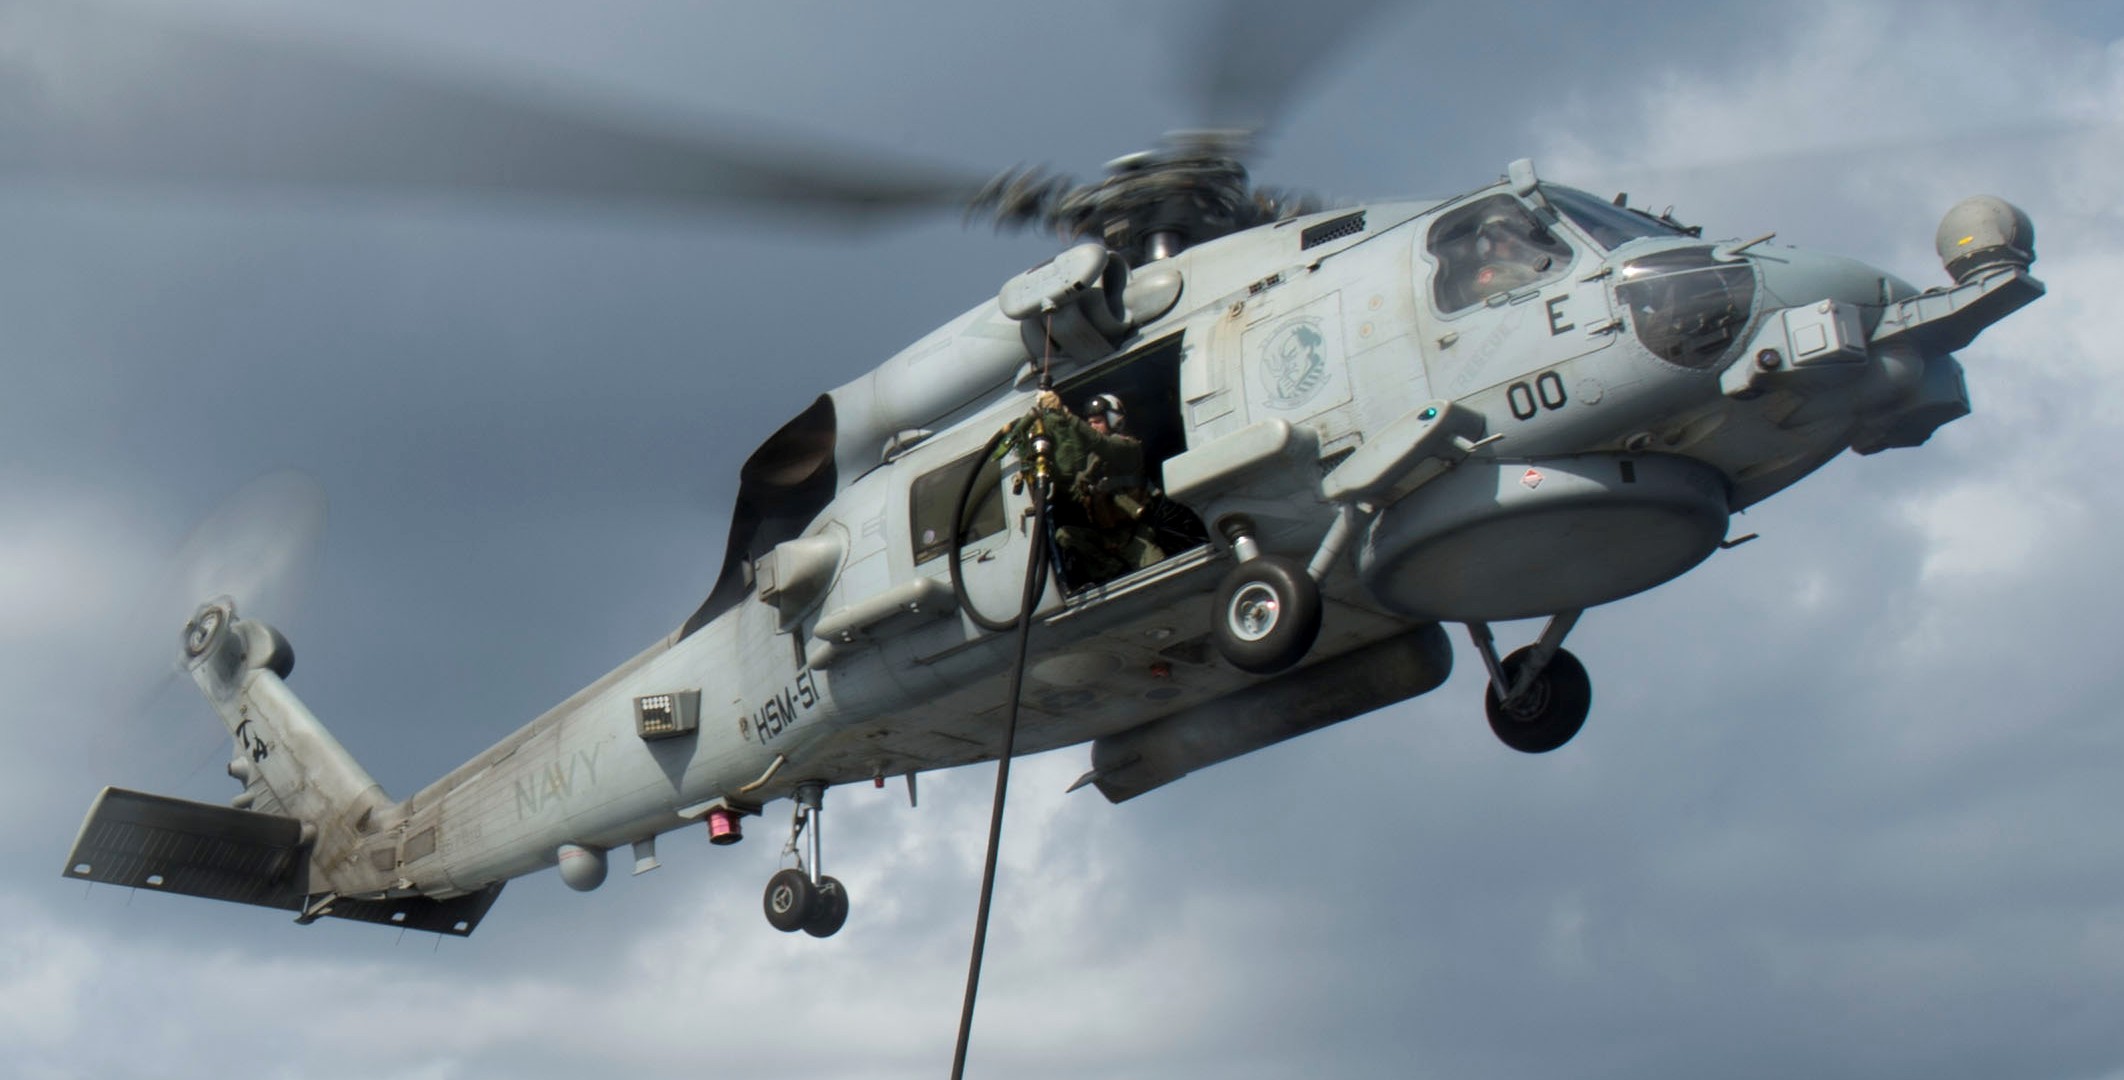 hsm-51 warlords helicopter maritime strike squadron mh-60r seahawk navy 2013 31